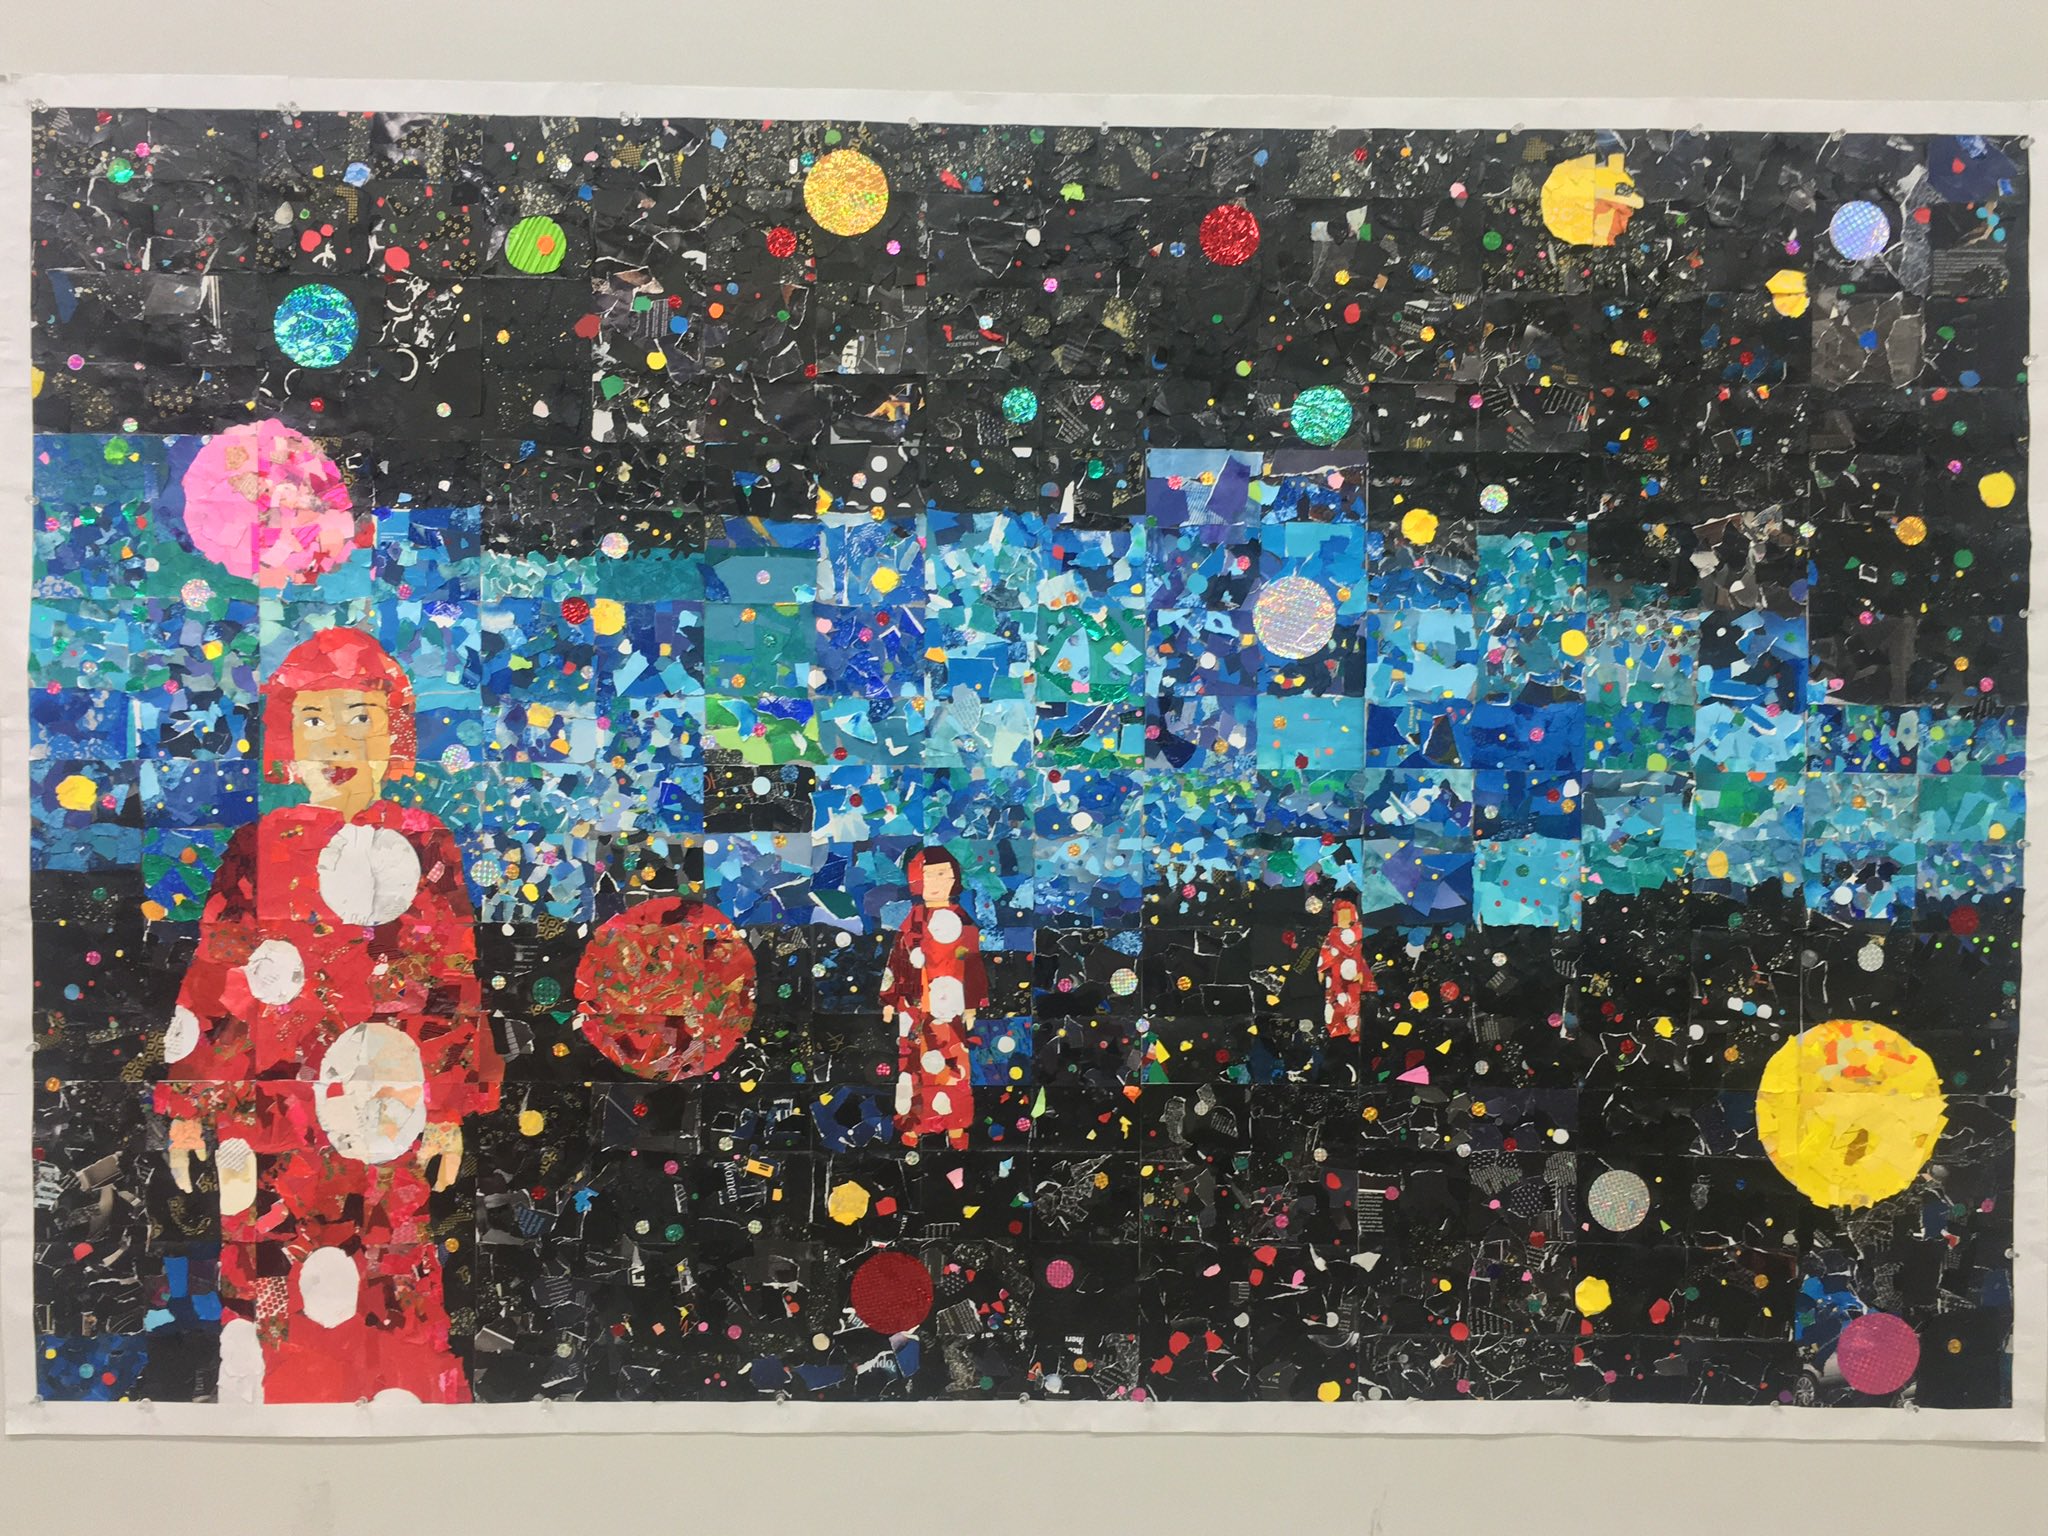 Erica Grainger Dotday Got Me Thinking Of The Awesome Kusama Collage We Did Two Years Ago Based On Eweinsteinilloz S Illustrations In From Here To Infinity Arted Fromheretoinfinity 草間彌生